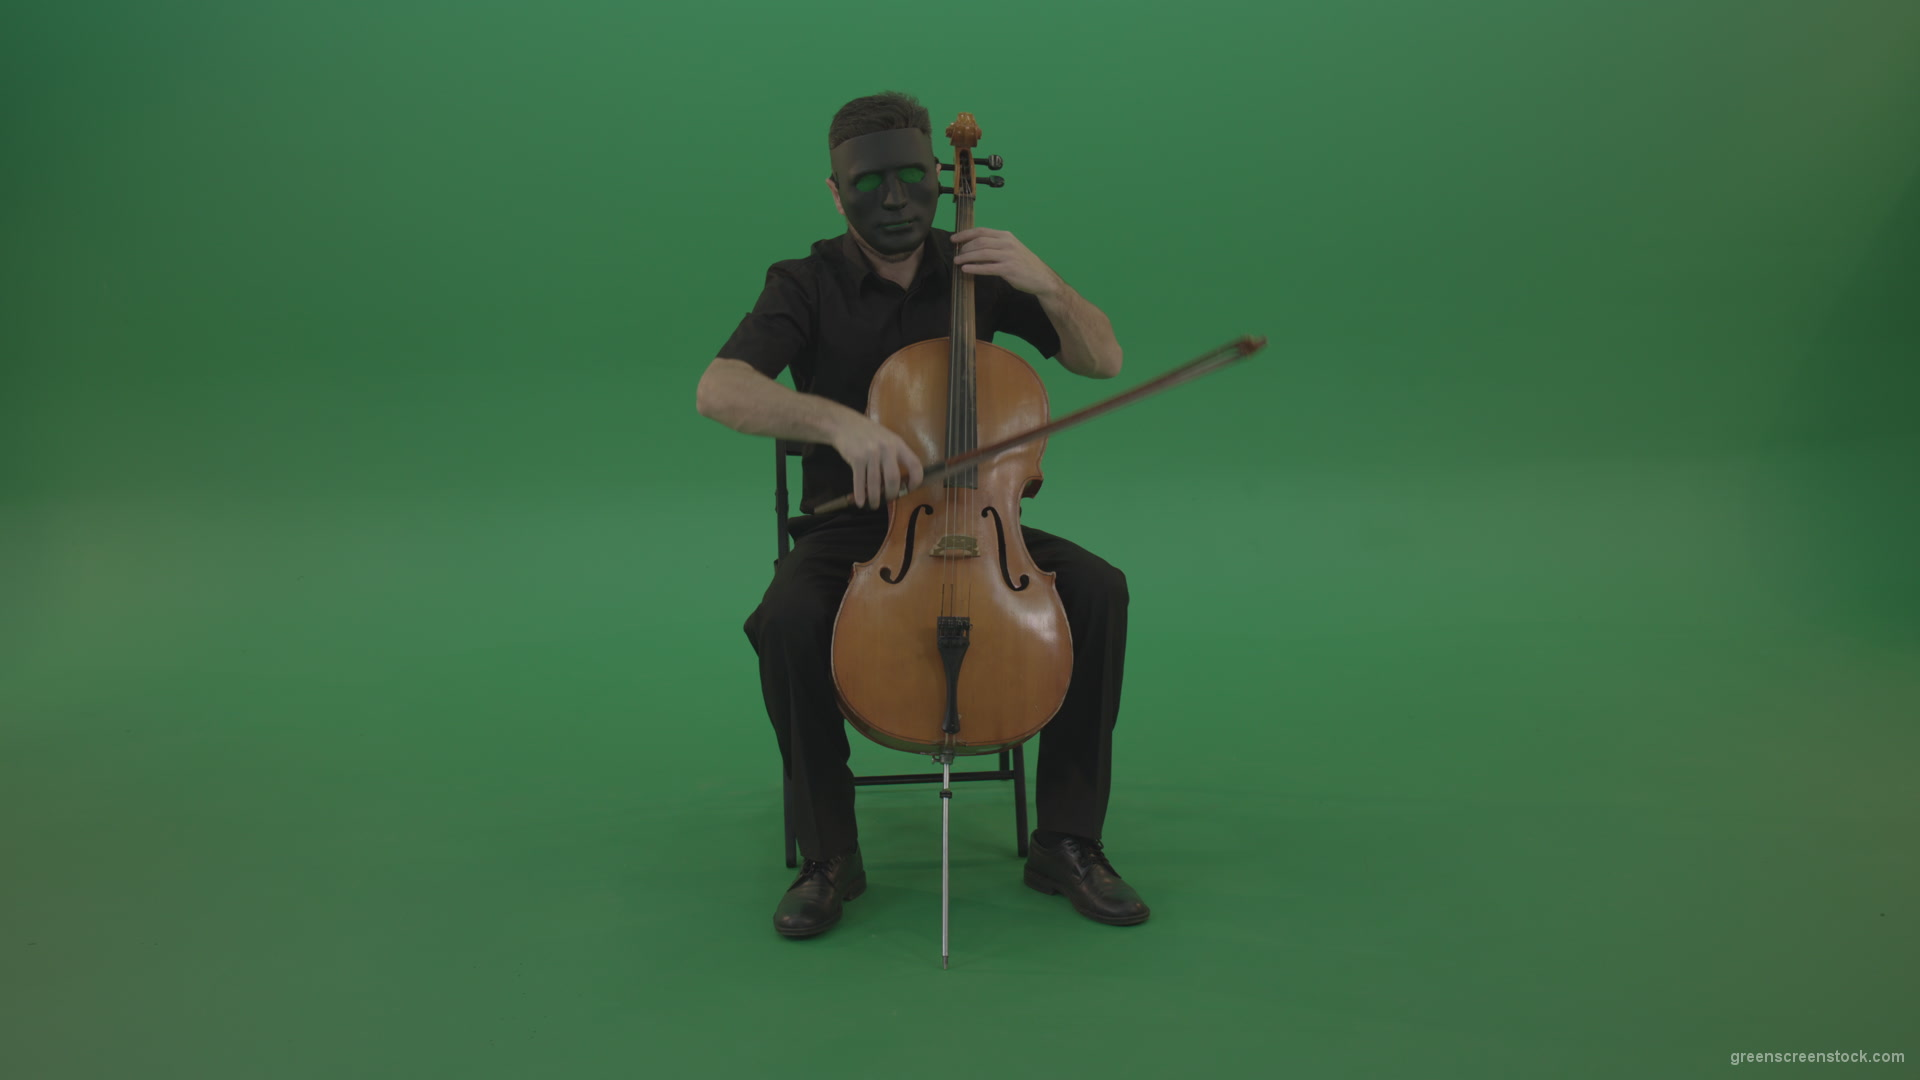 Full-size-man-in-black-wear-and-mask-play-violoncello-cello-strings-music-instrument-isolated-on-green-screen_009 Green Screen Stock